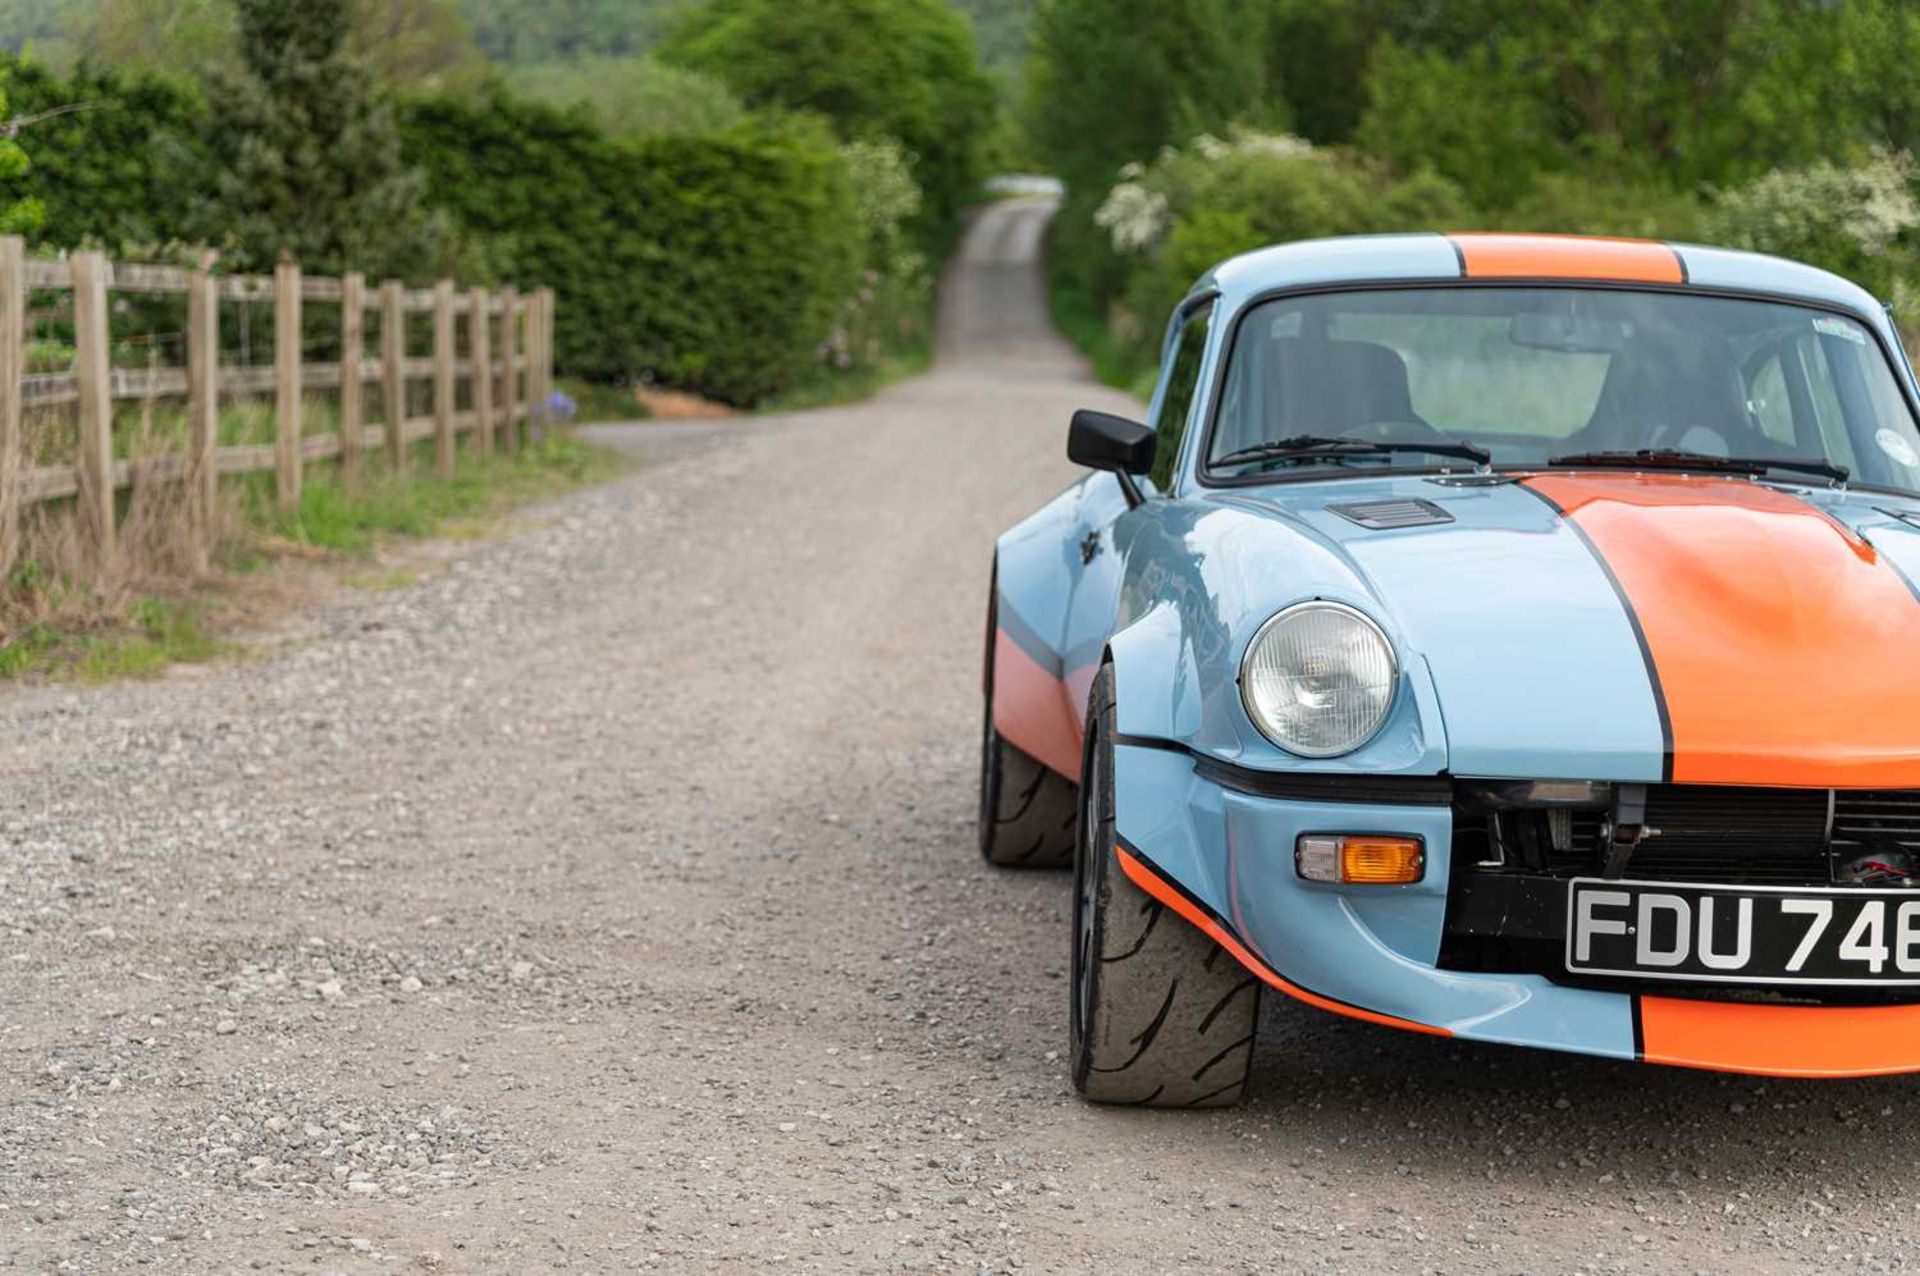 1973 Triumph GT6  ***NO RESERVE*** Presented in Gulf Racing-inspired paintwork, road-going track wea - Image 3 of 65